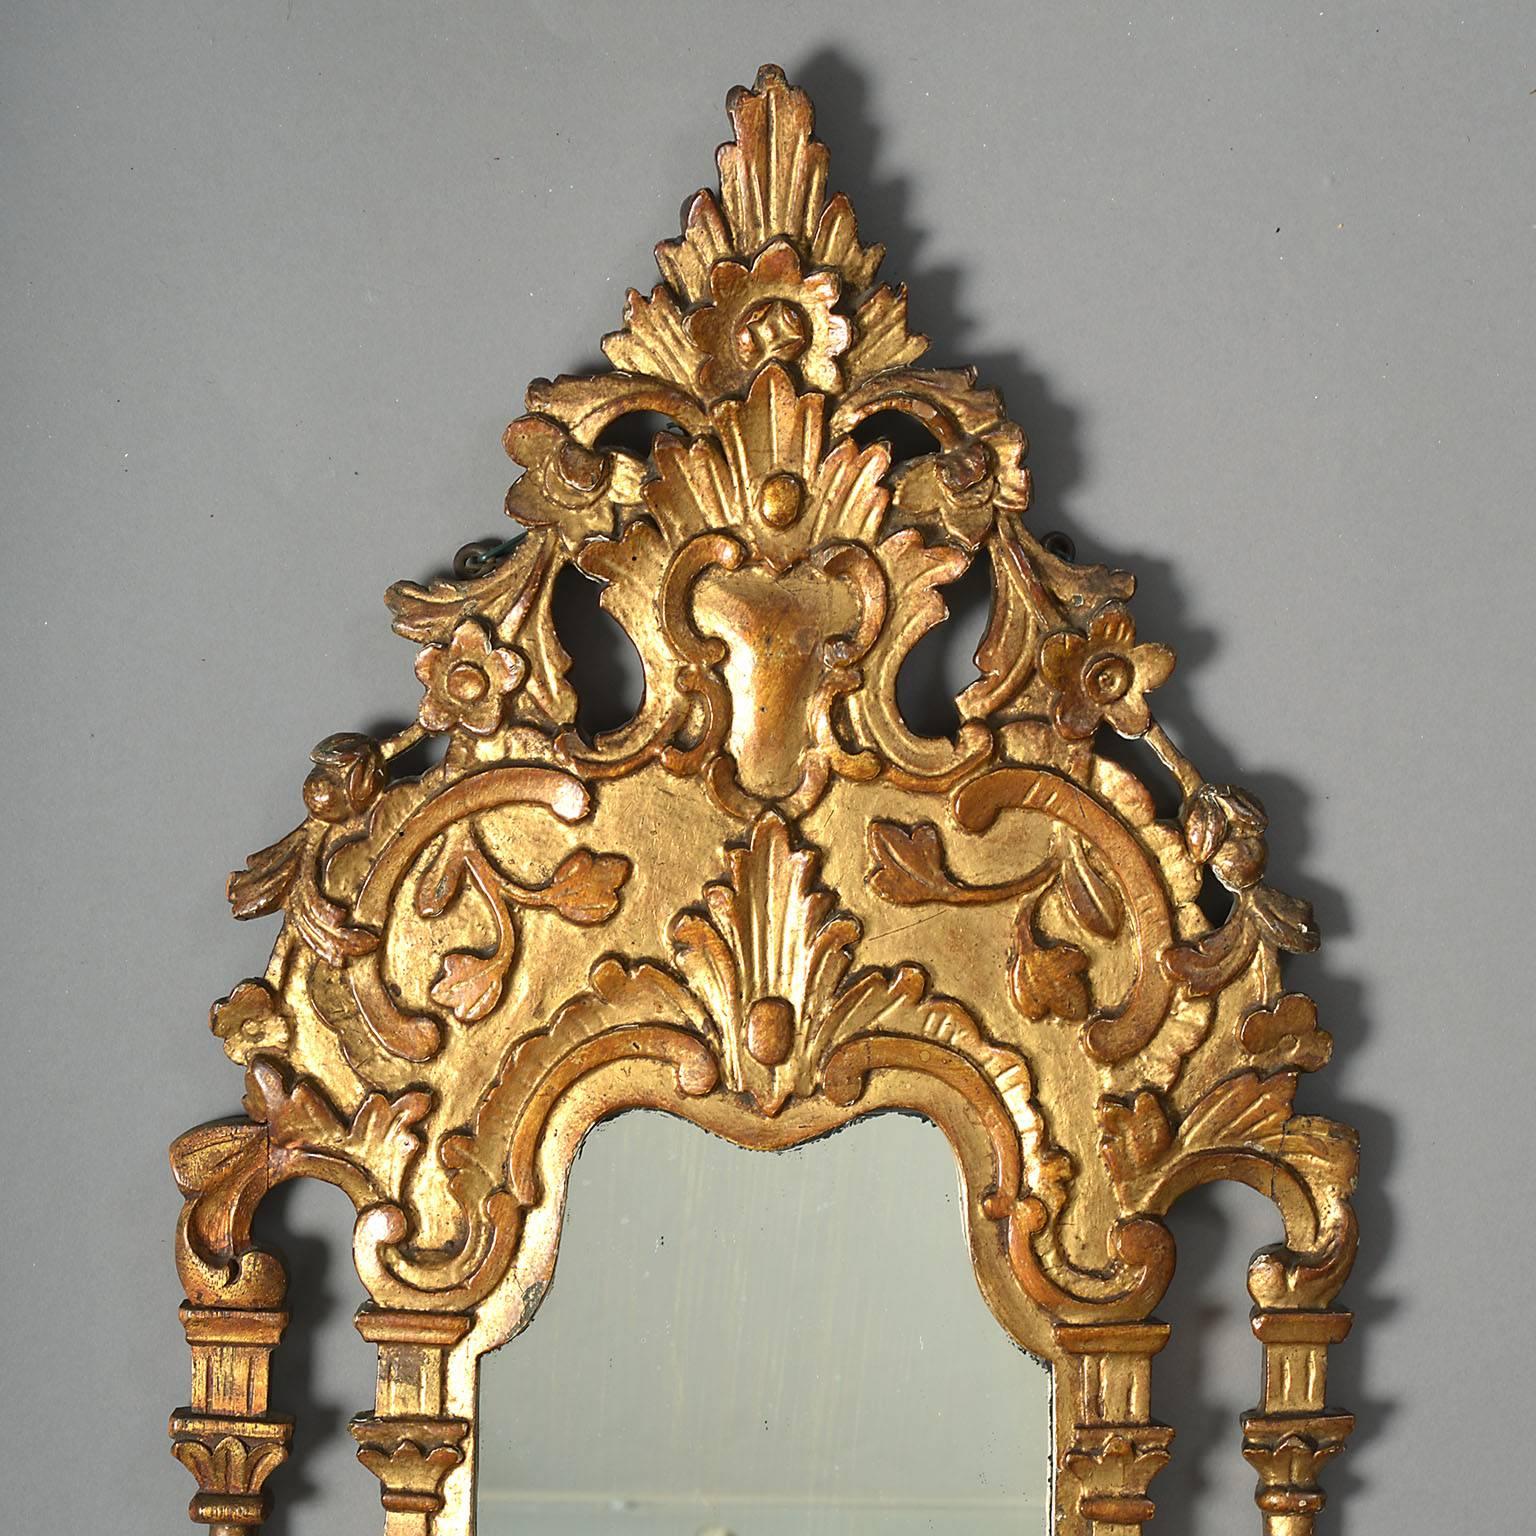 Rare 18th century ottoman giltwood Turban stand
In the form of an arcaded rococo wall-bracket incorporating a shaped mirror plate above a projecting shelf supported on a scrolling bracket.

Ottoman Empire, Turkey, circa late 18th